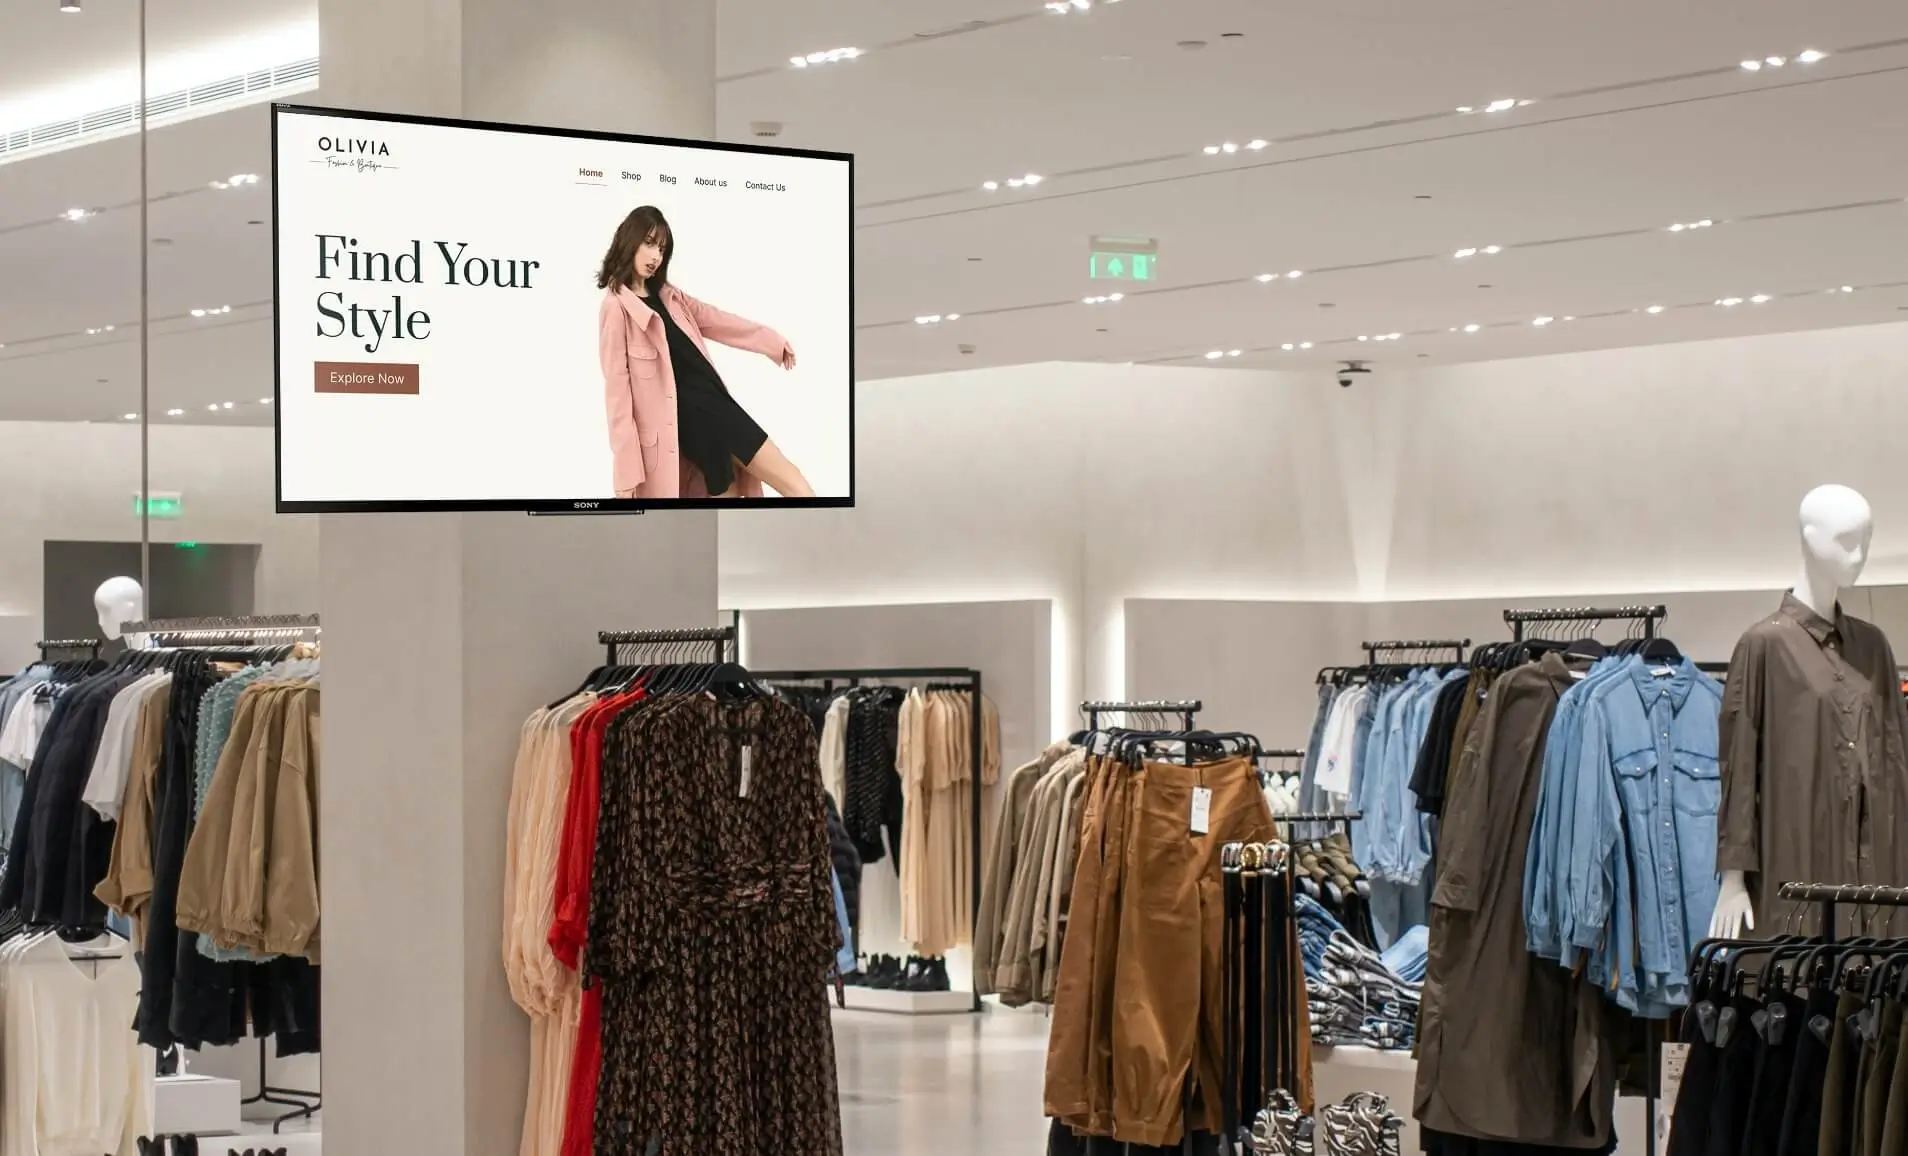 Digital Signage inside a retail store displaying their website using web url app from Pickcel